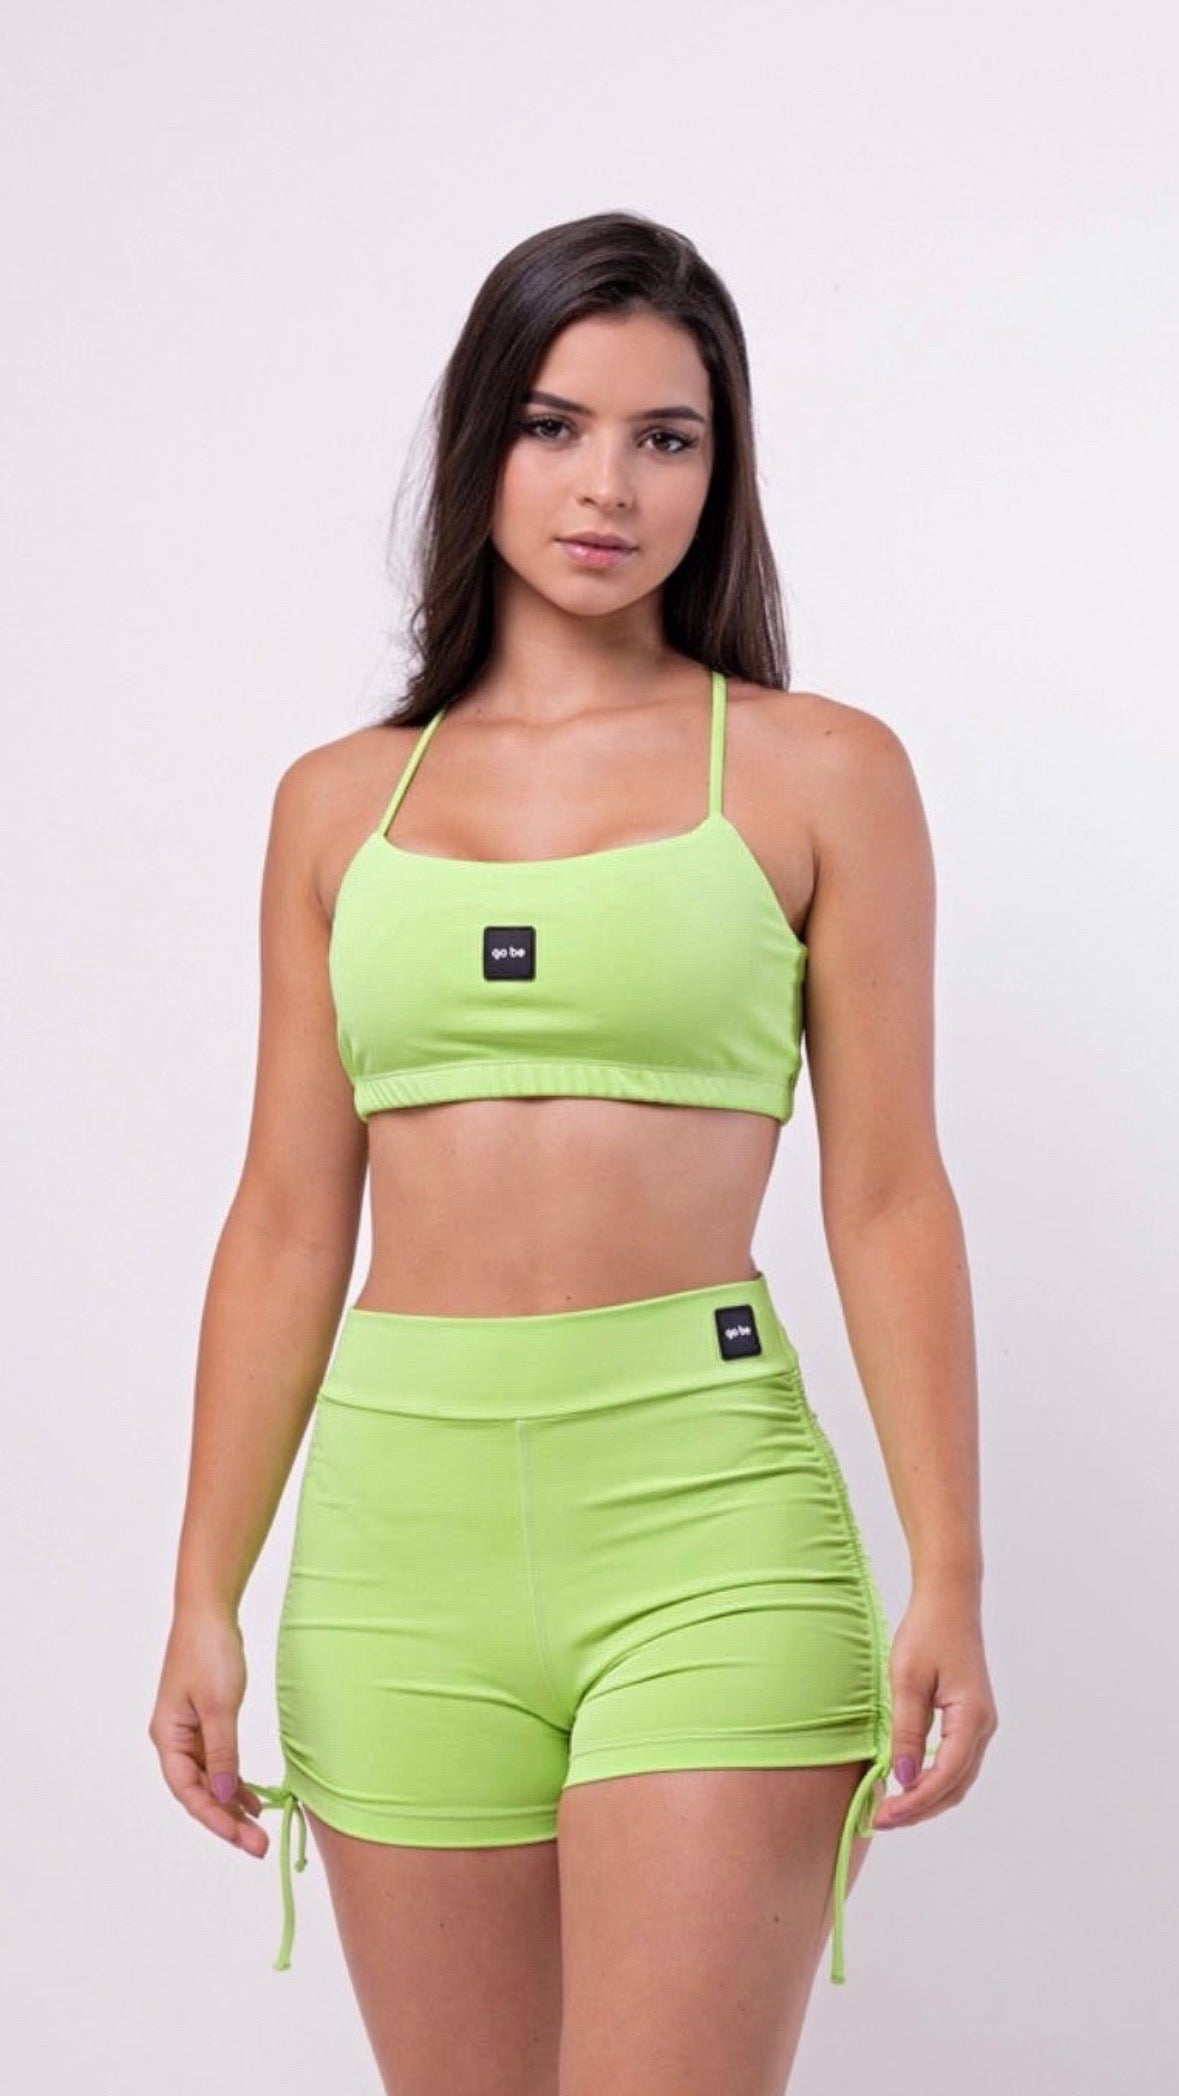 SHORT PUSH-UP – GO BE ACTIVEWEAR